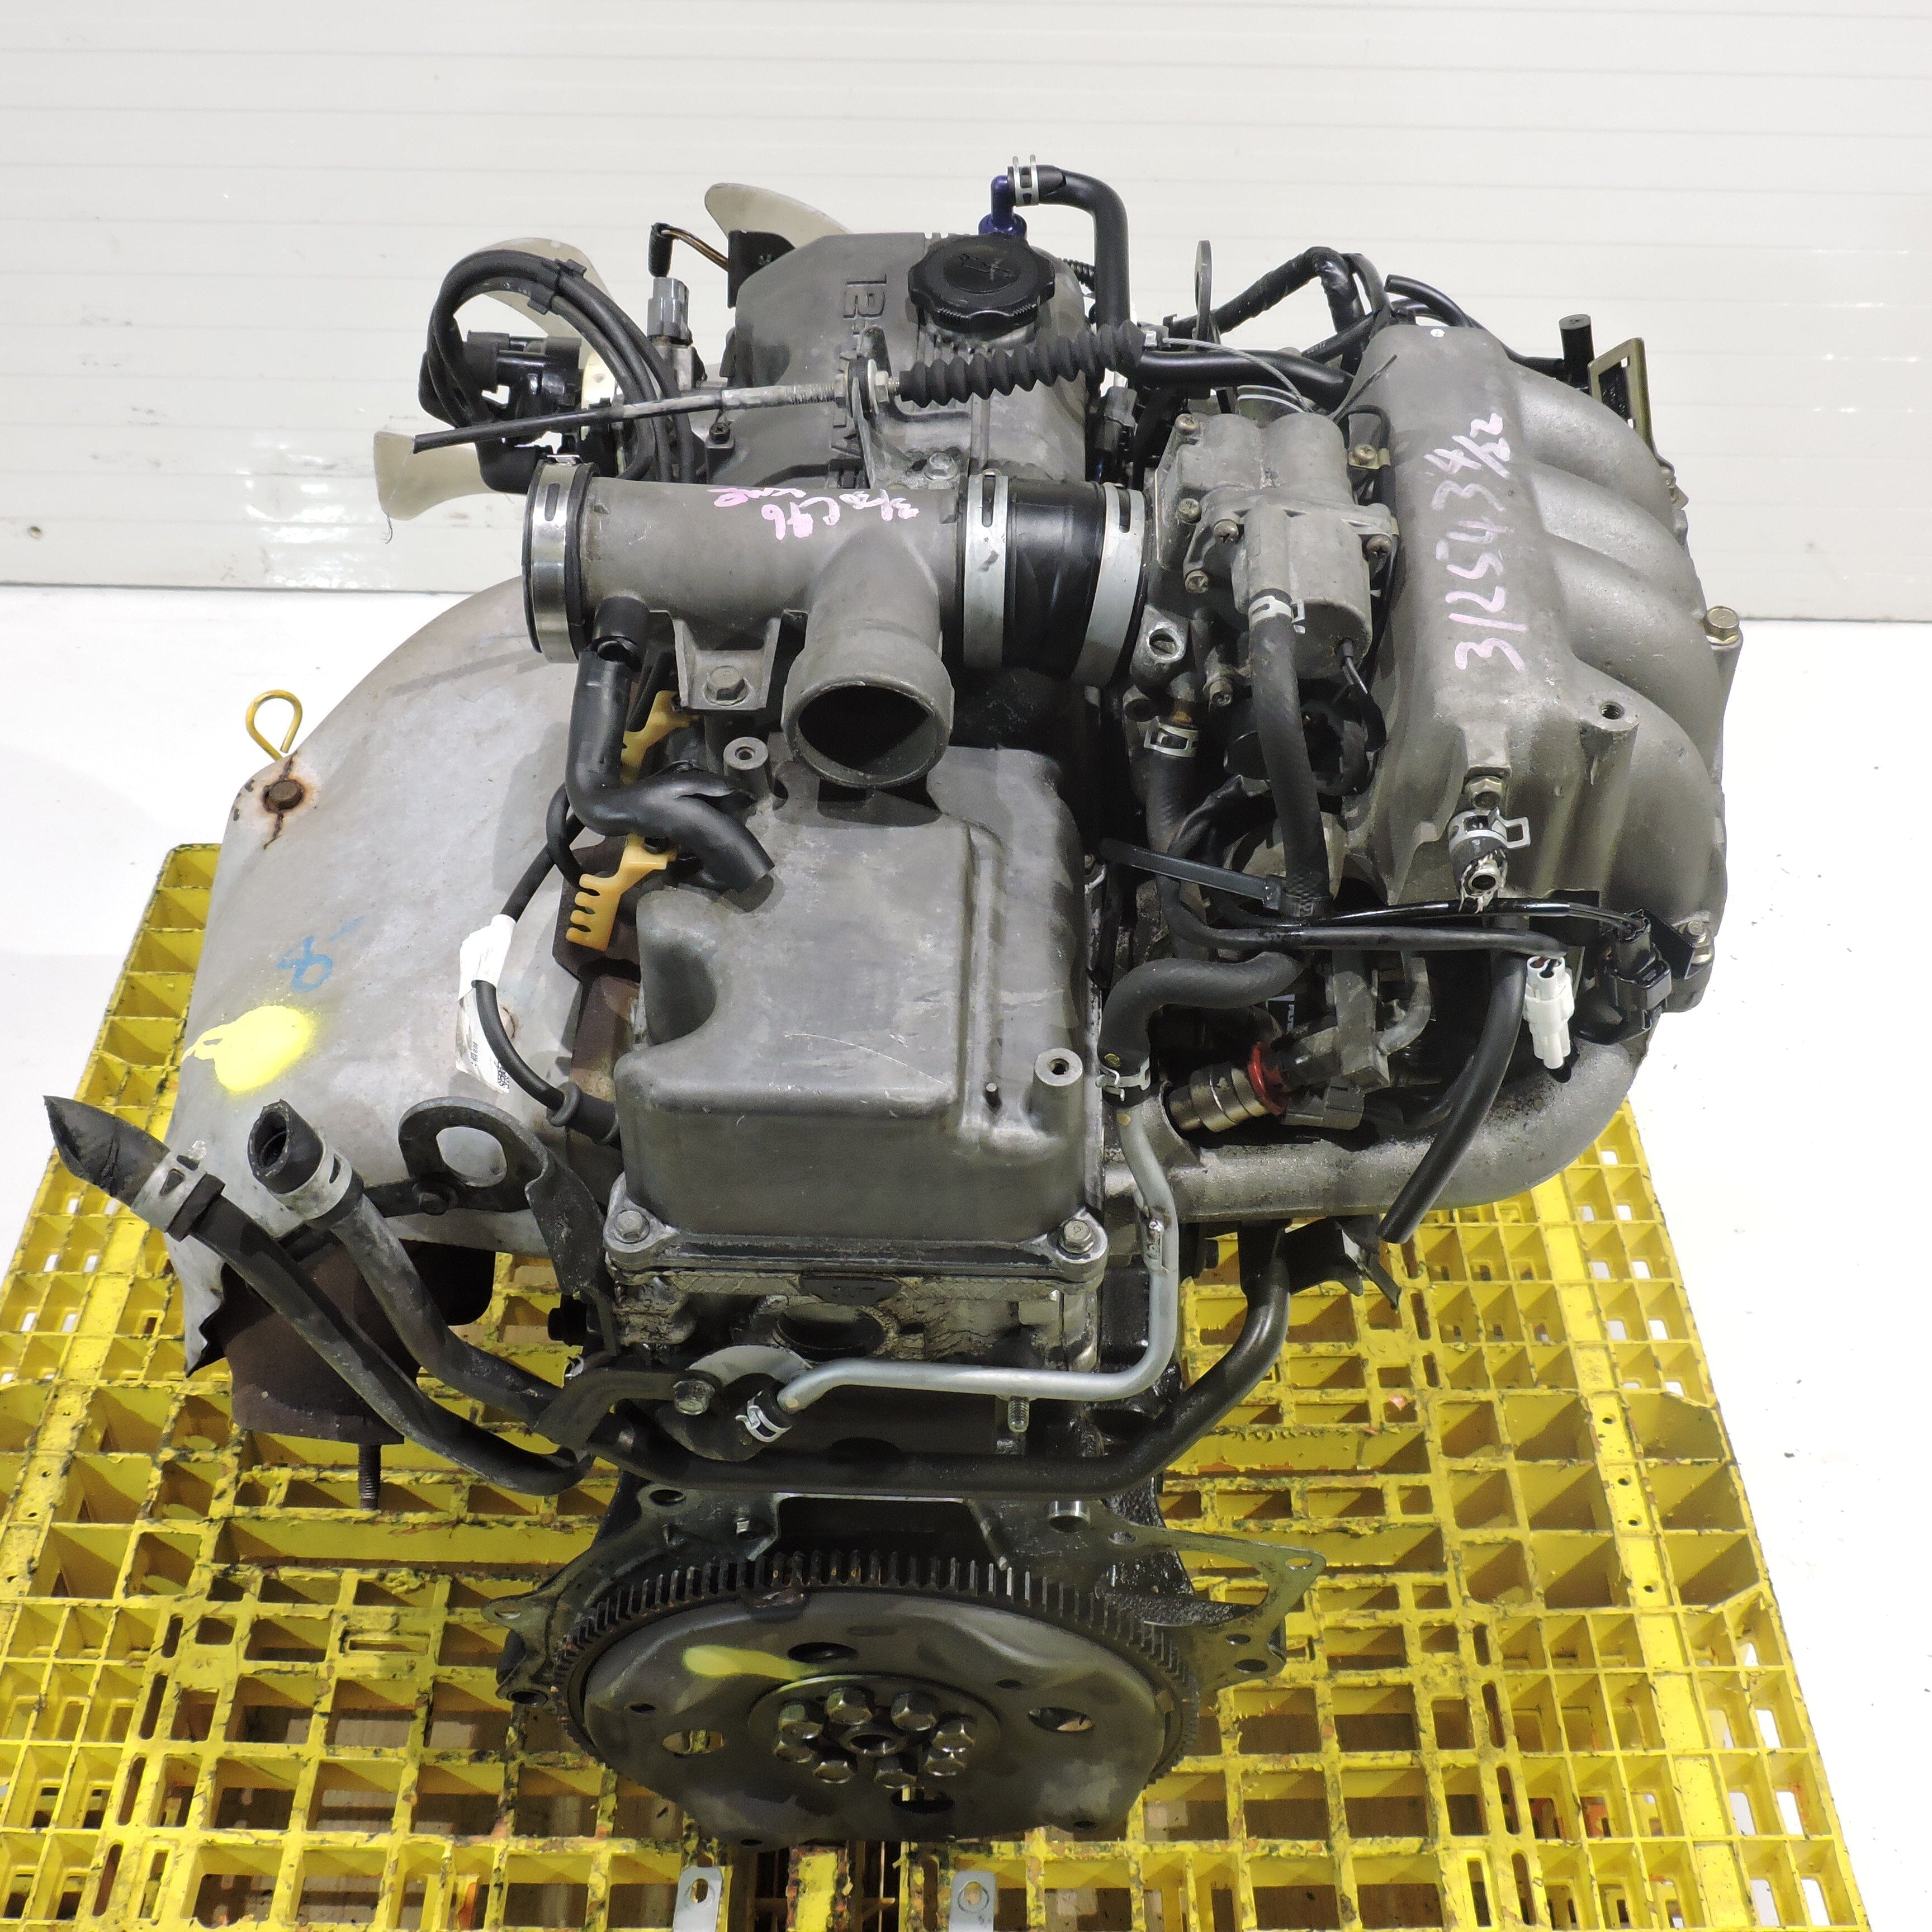 Mazda B2600 JDM Replacement For 2.6L Engine - G5